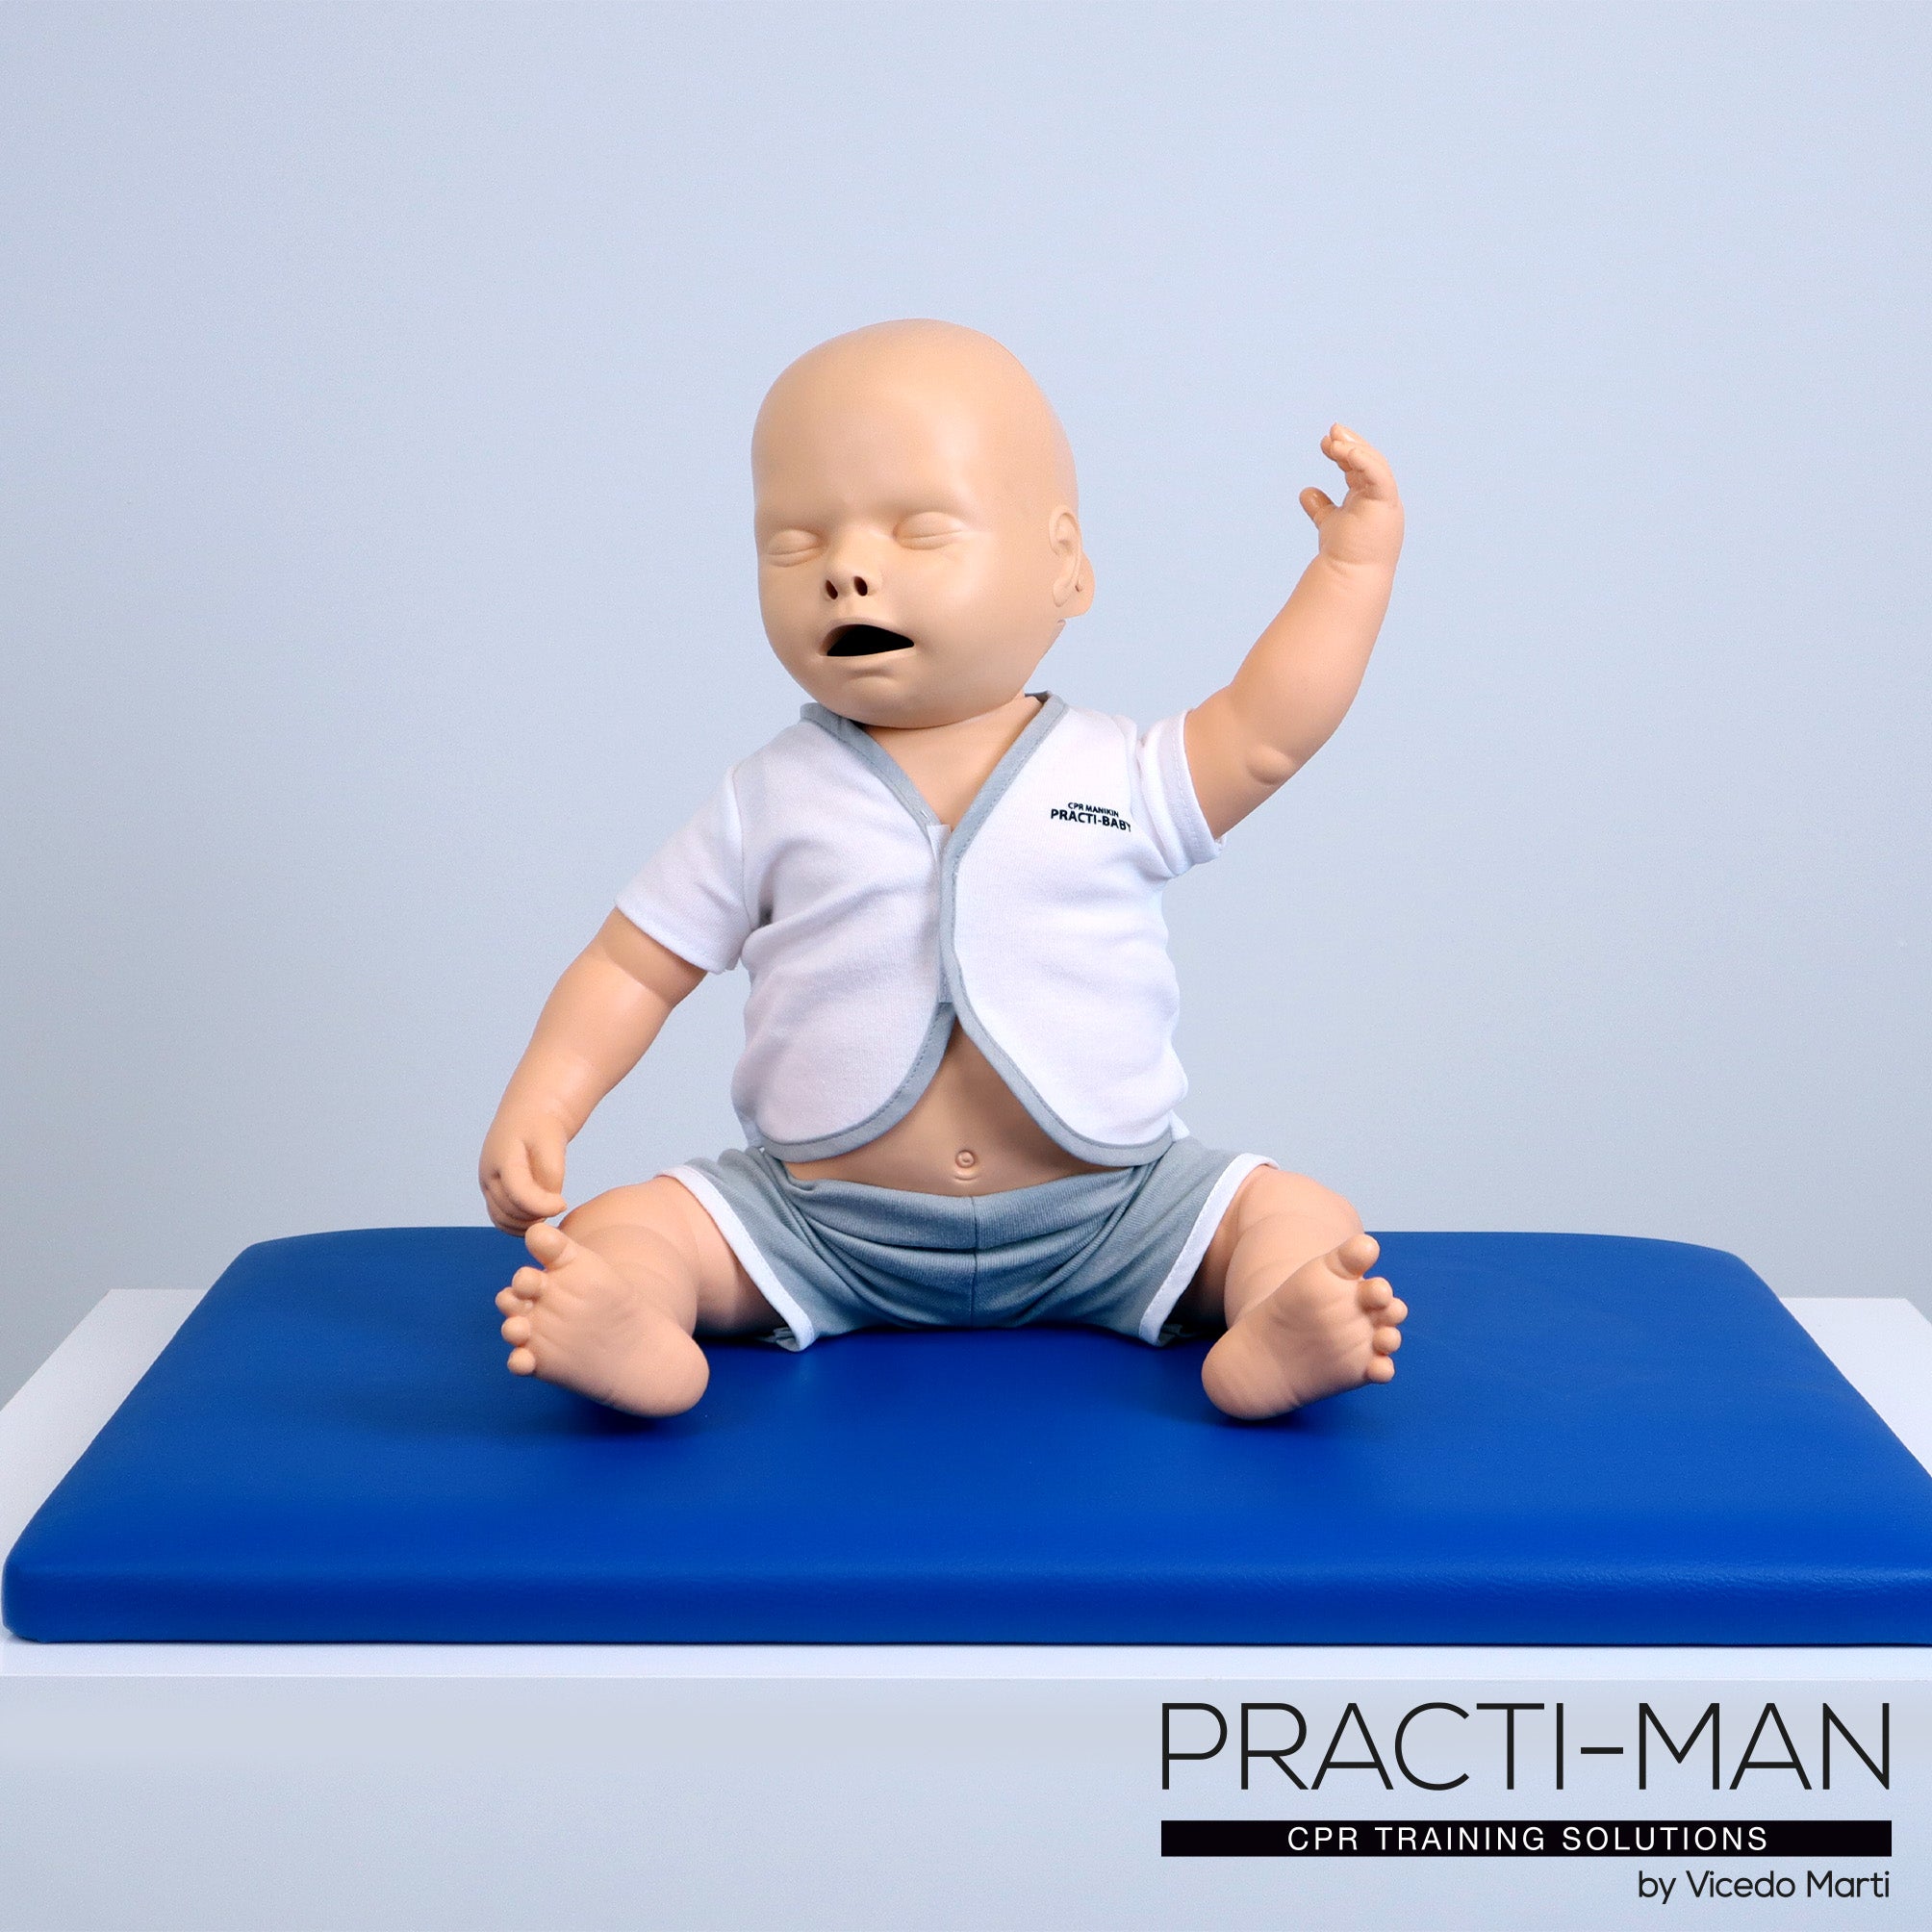 Practi Multi Pack | 4x Adults + 2x Infants | Practi-Man | Available from LivCor Australia